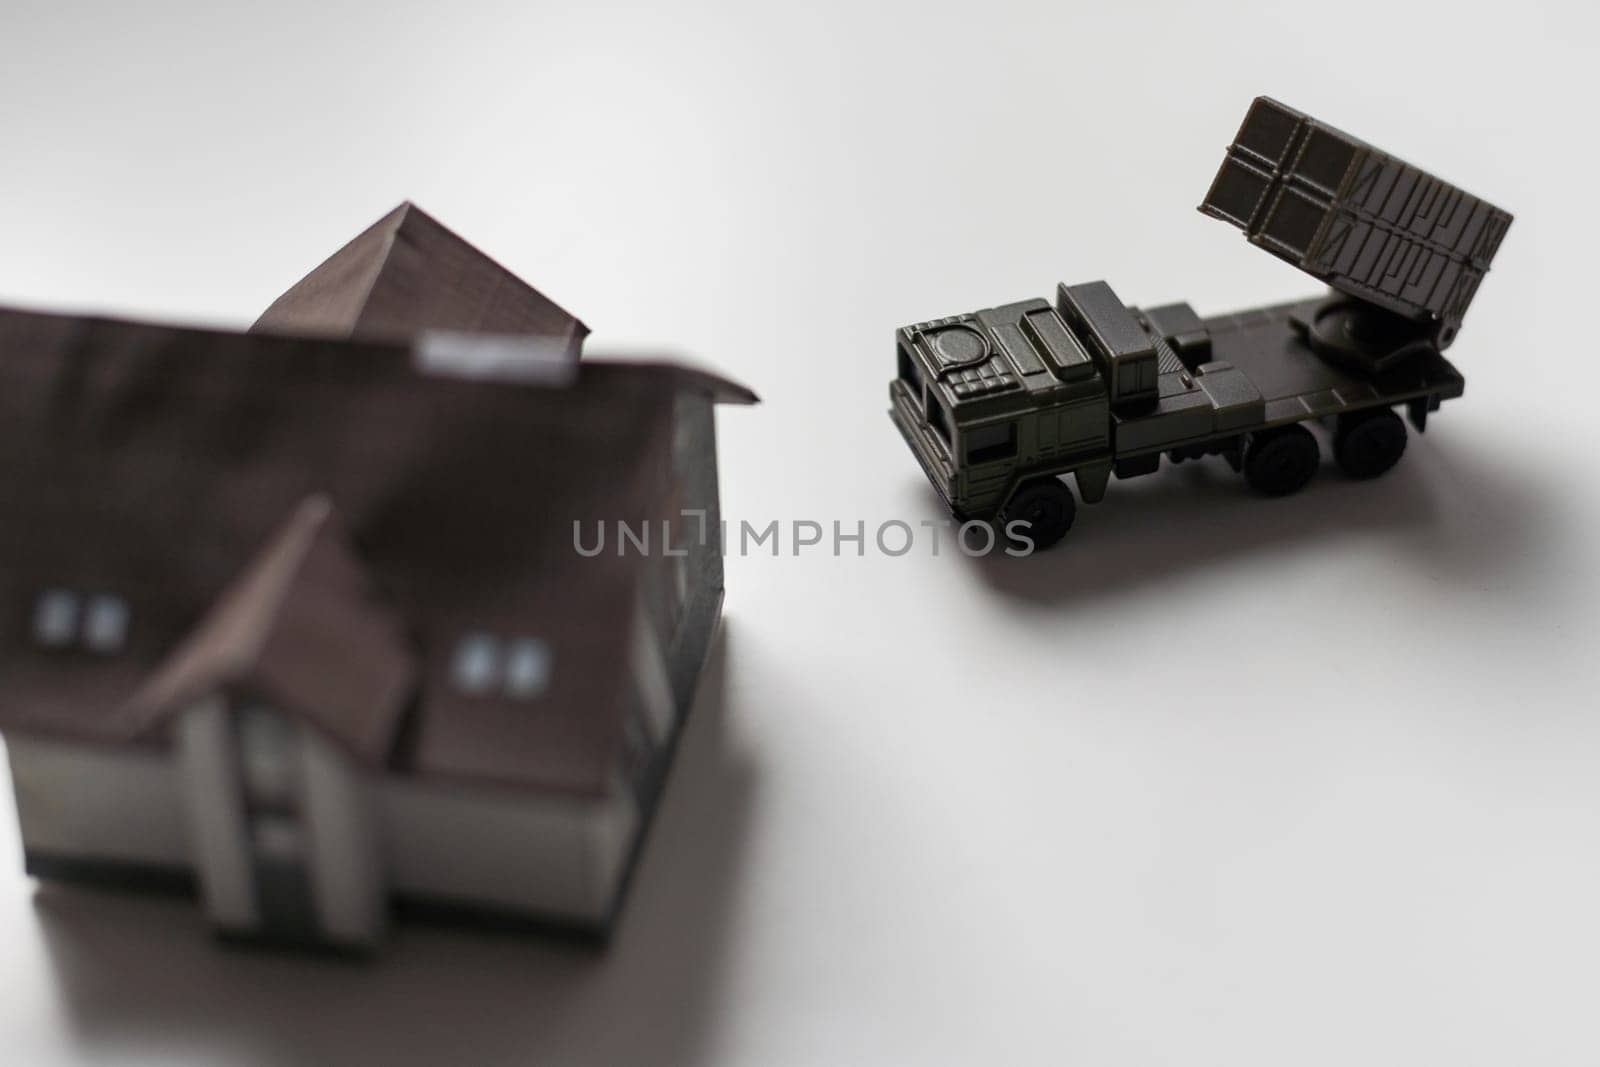 Assembled plastic models, toys, miniature models of anti-aircraft missile system in scale . High quality photo